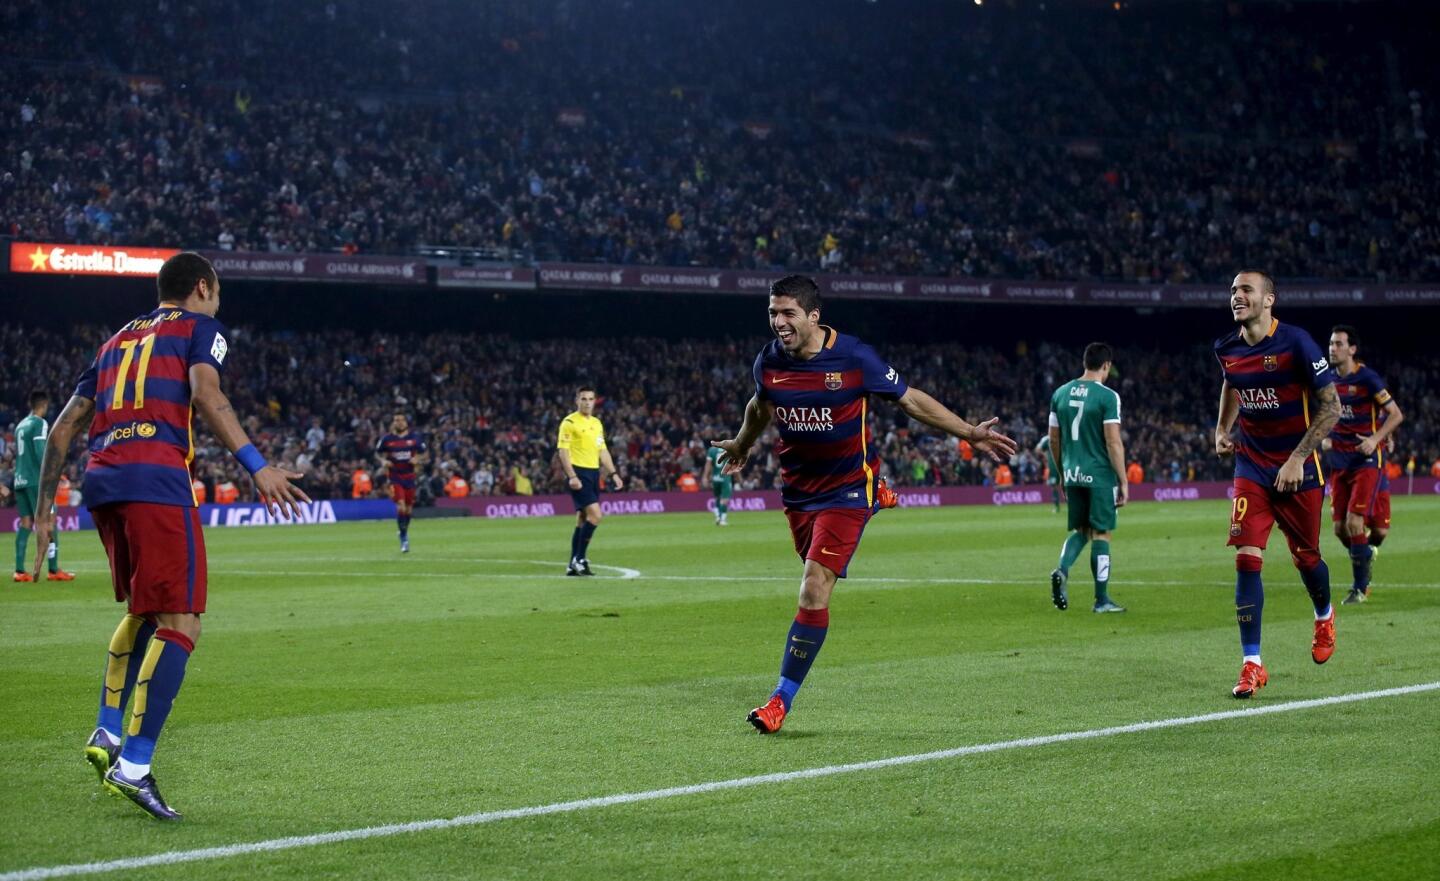 Barcelona's Luis Suarez celebrates his second goal with Neymar against Eibar during their Spanish first division soccer match at Camp Nou stadium in Barcelona